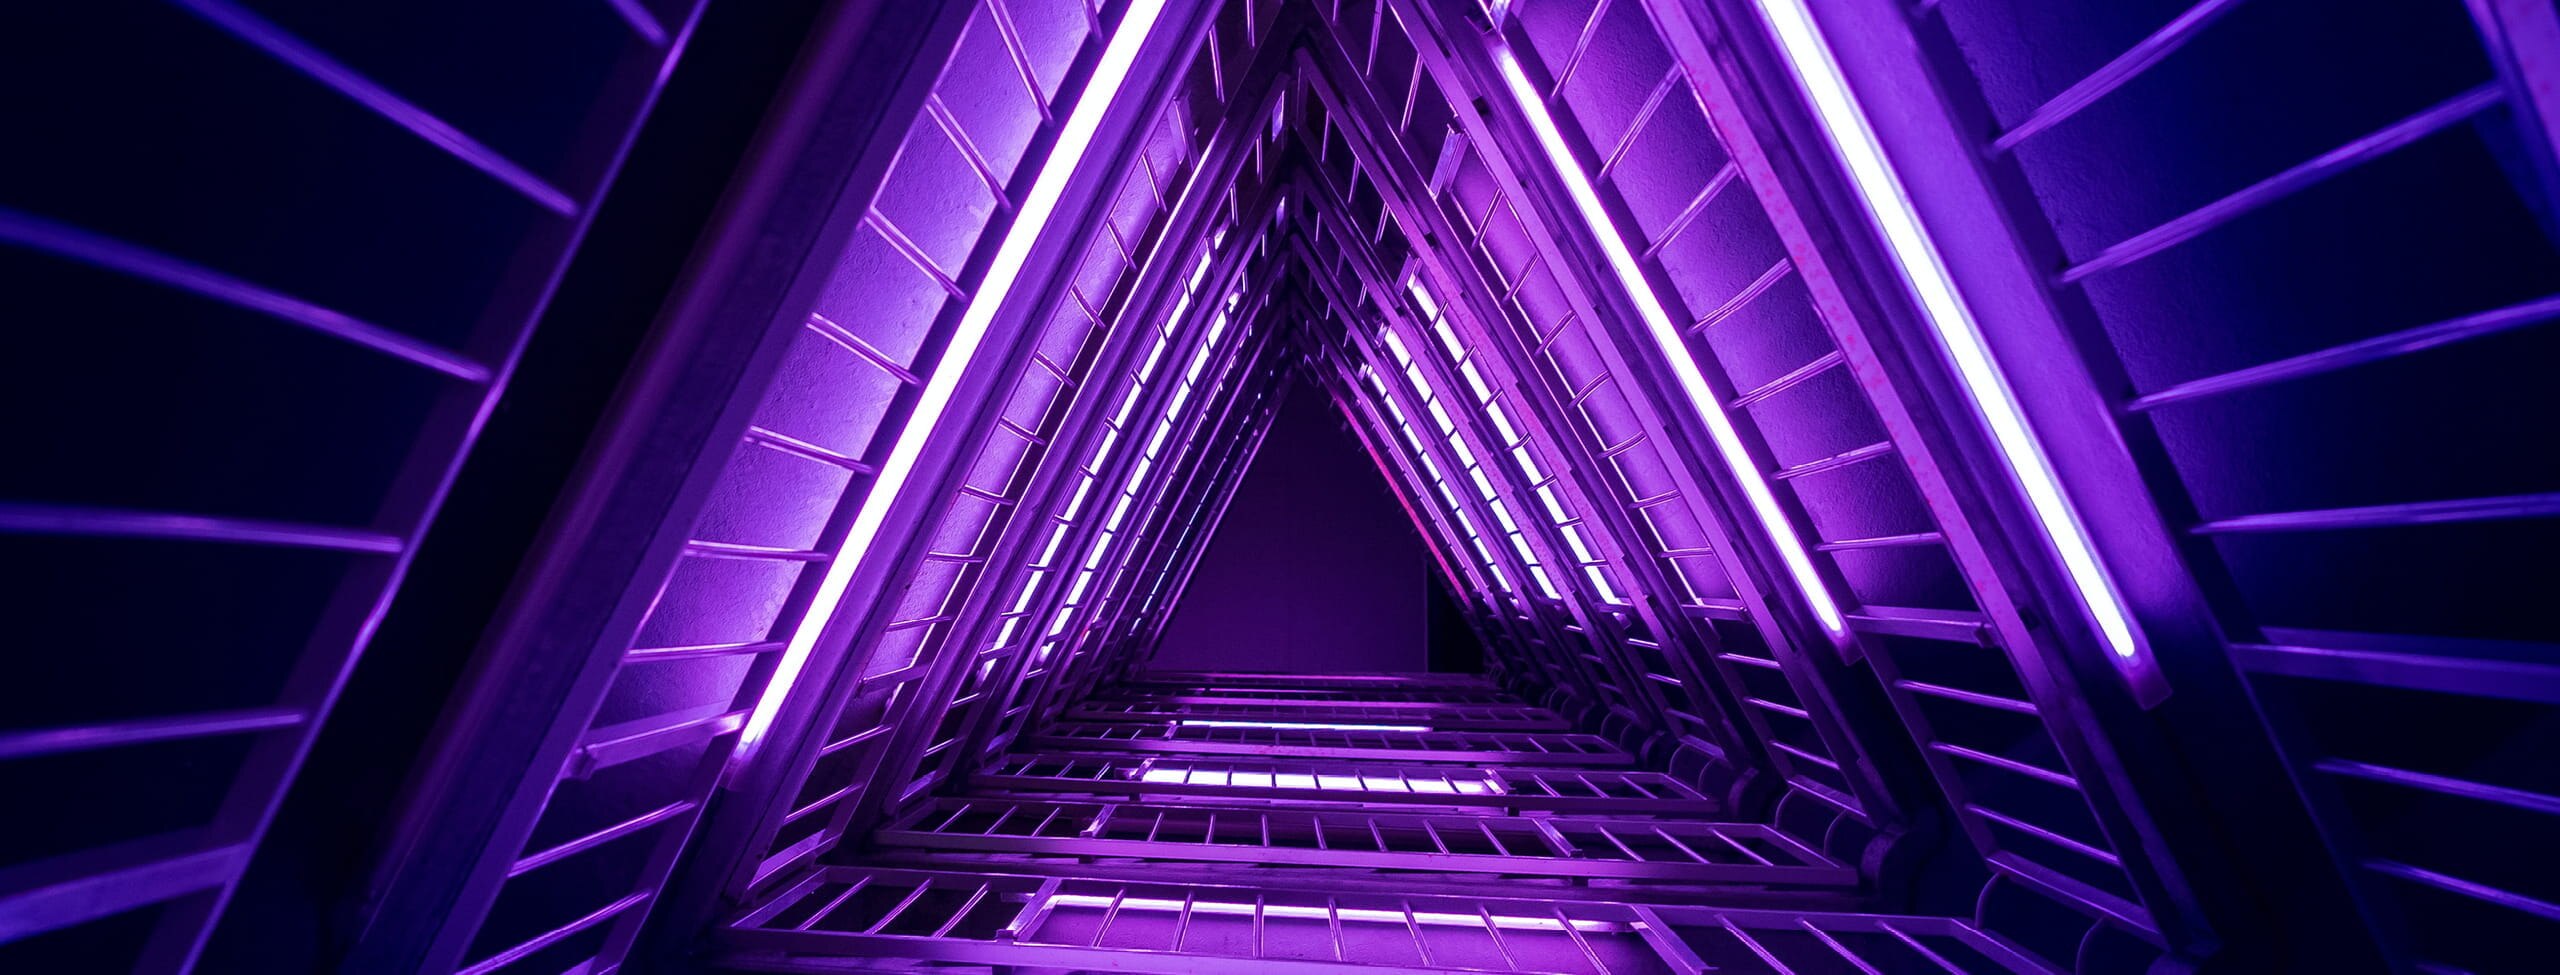 Staircase lined with purple lights